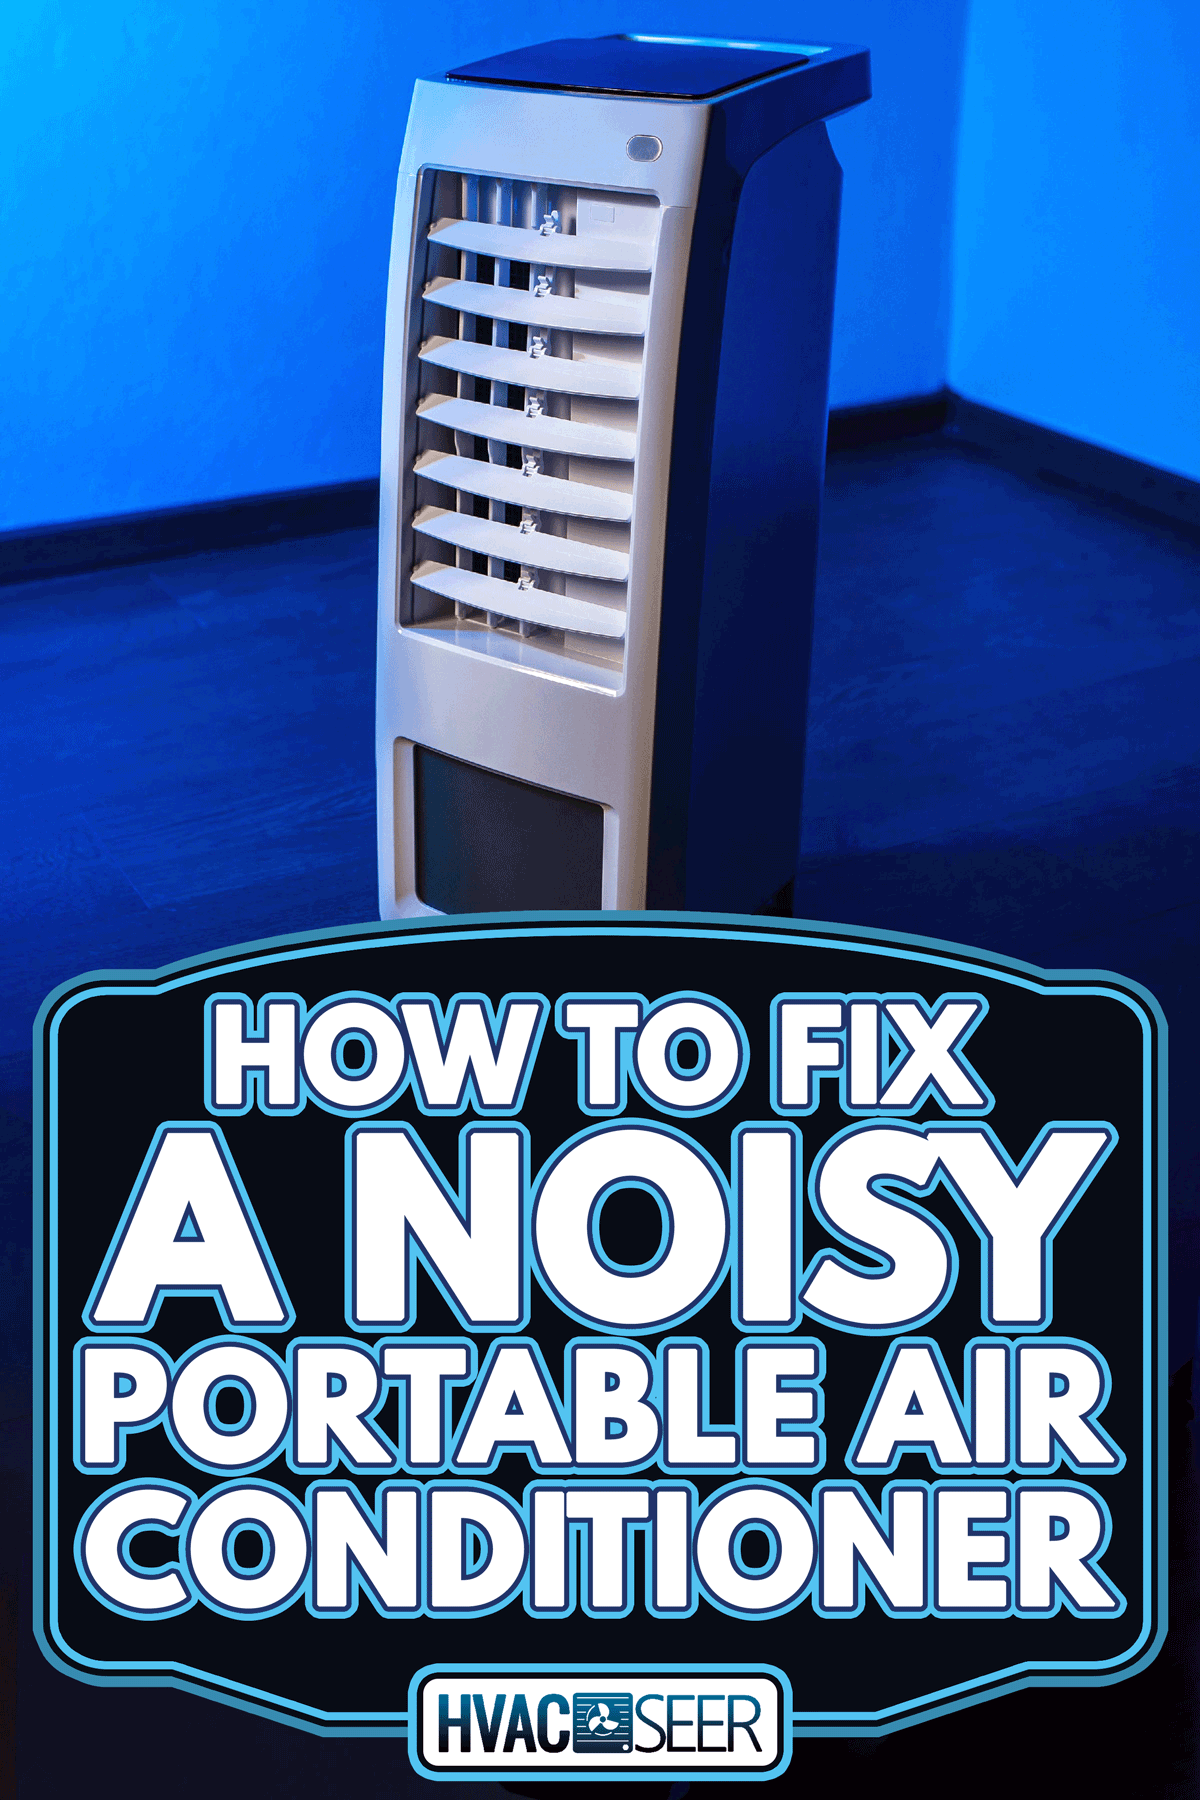 Portable air conditioner in a blue light room, How To Fix A Noisy Portable Air Conditioner